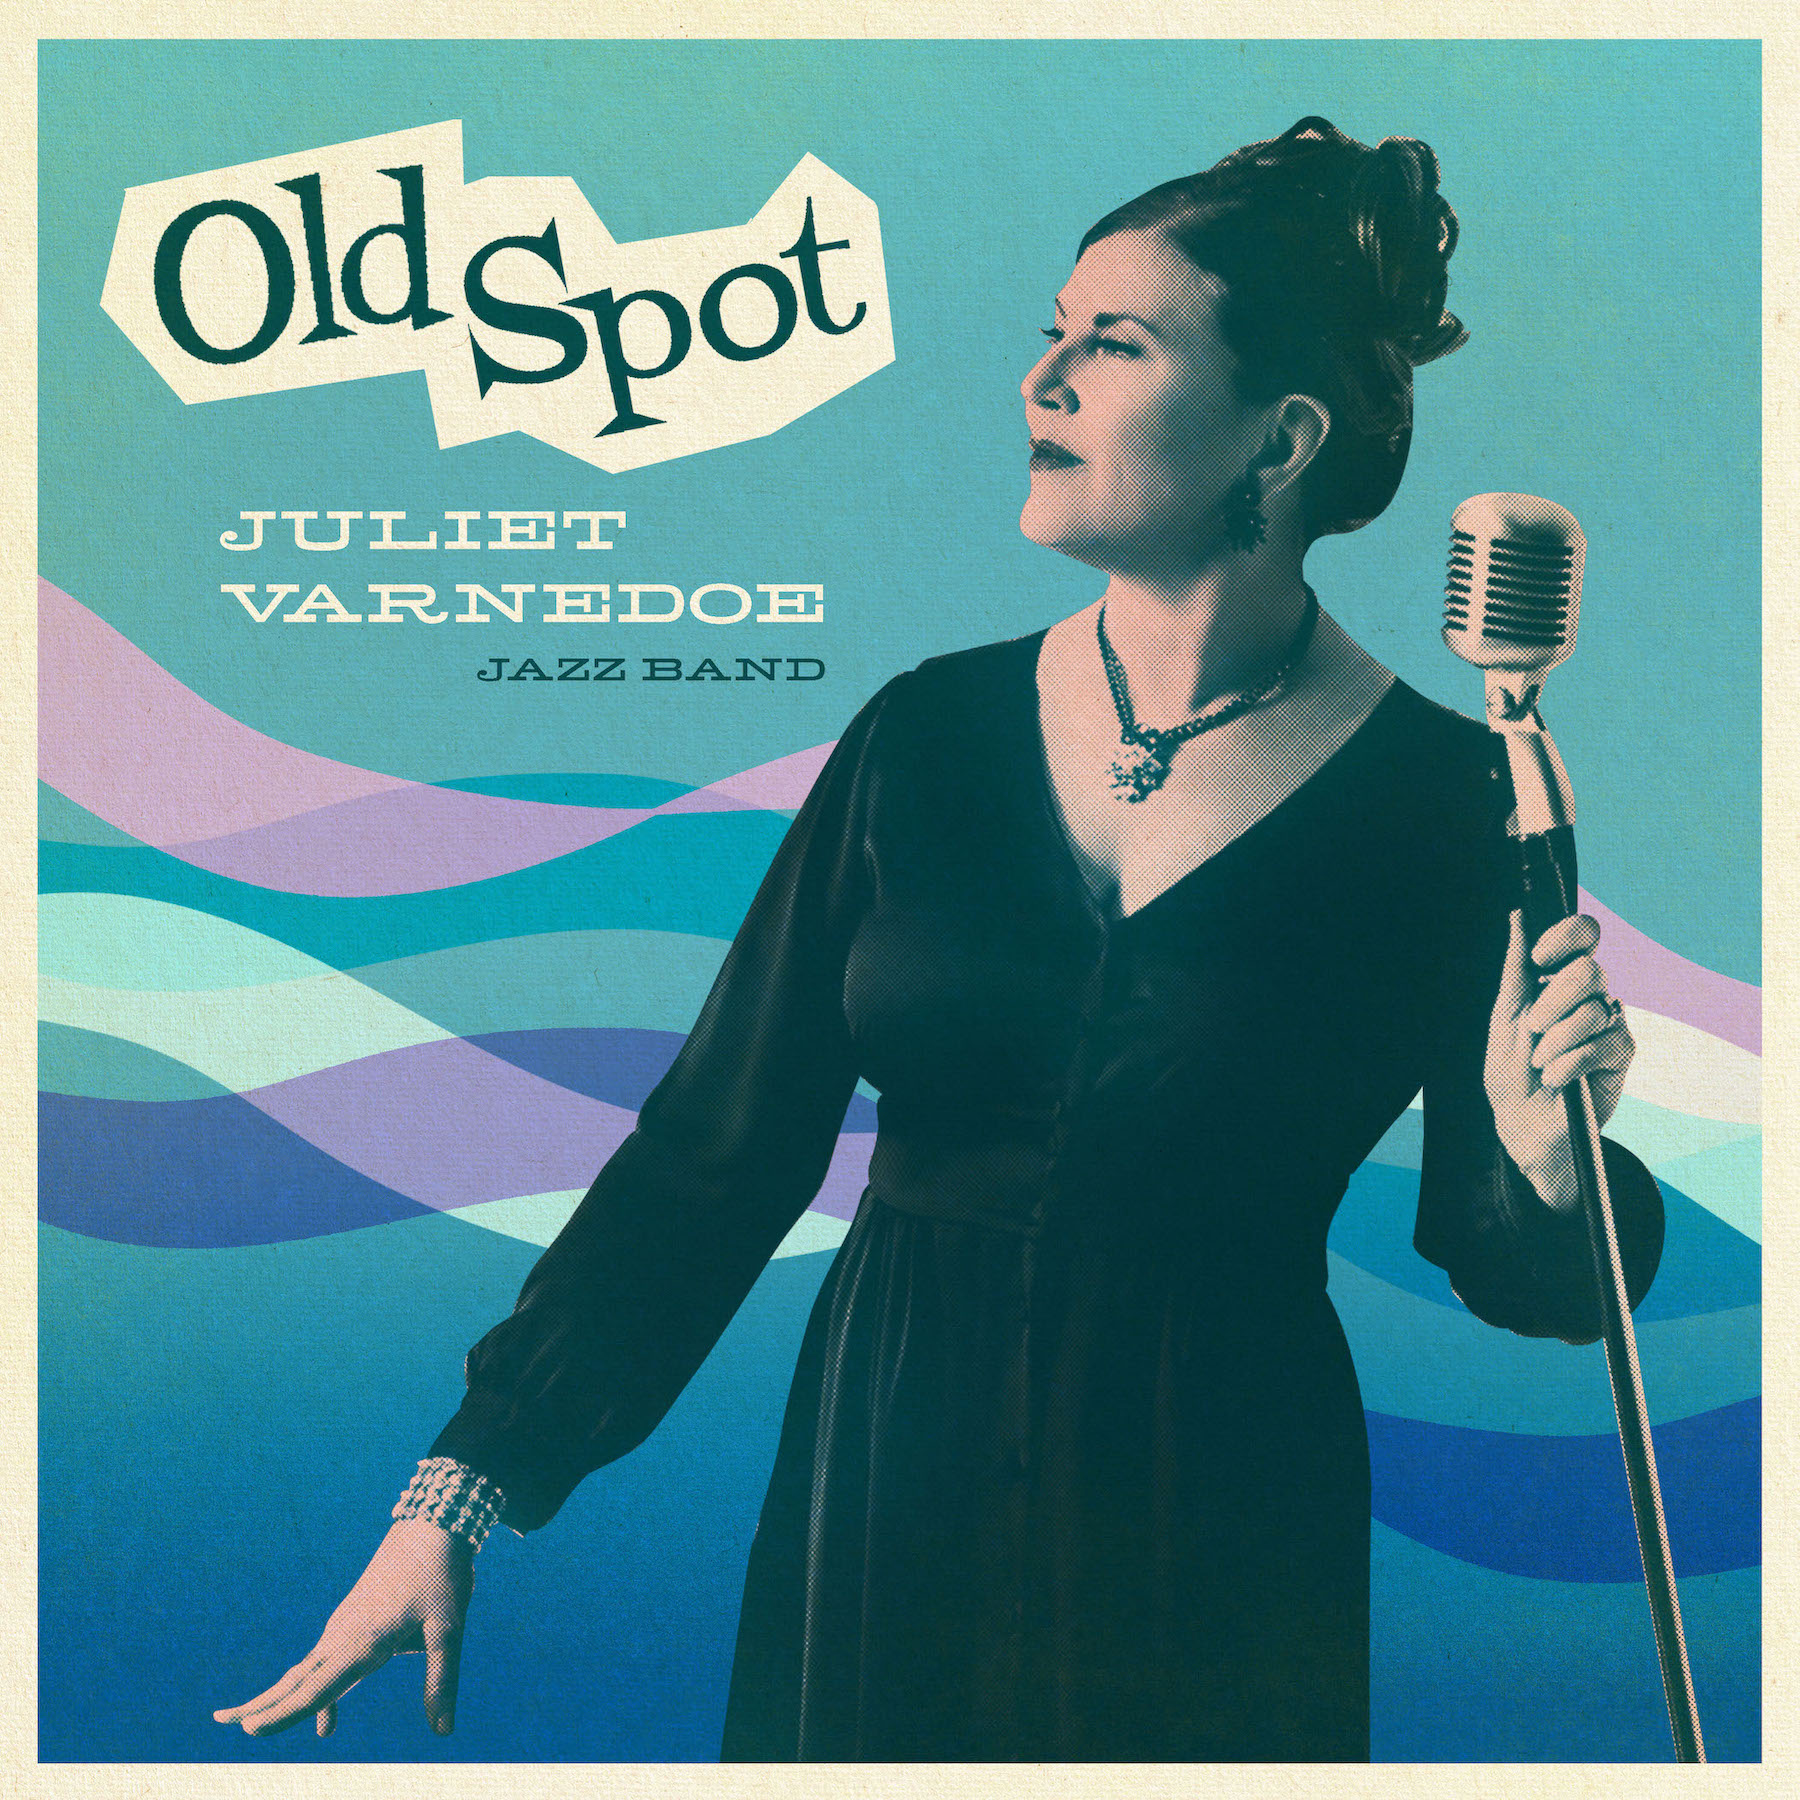 Juliet Varnedoe to Release New Single "Old Spot" from Upcoming Album "Cajun Bleu" on February 23